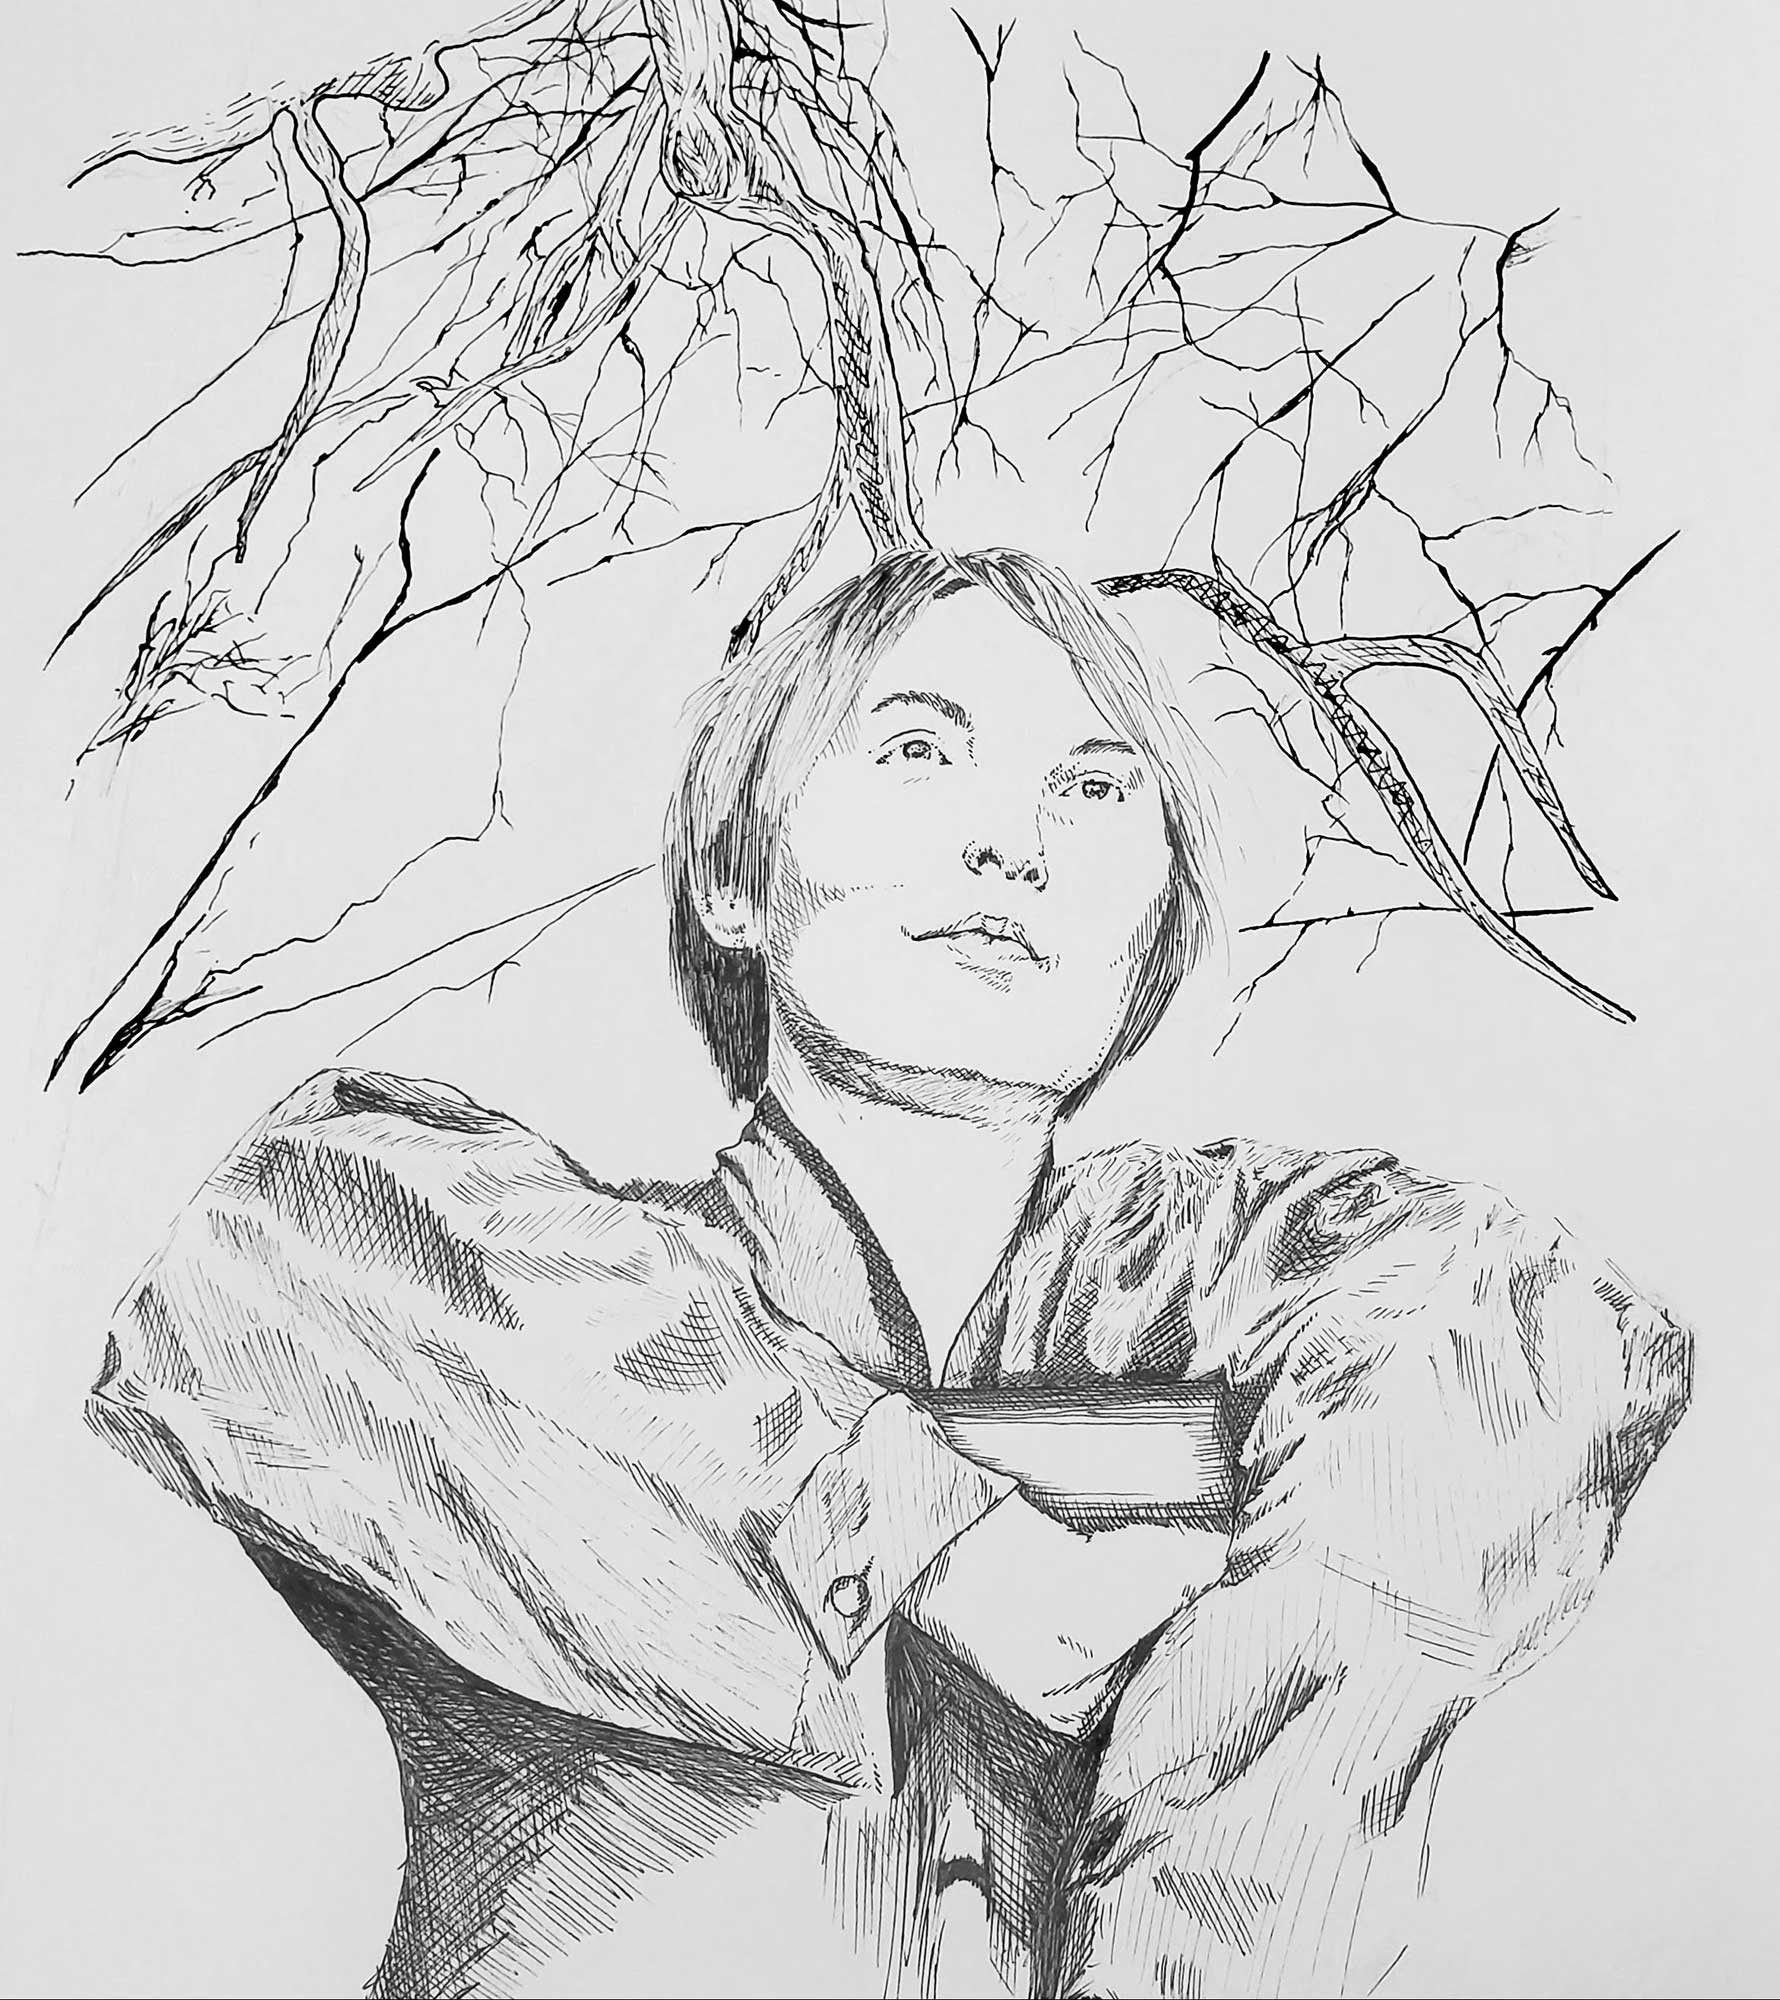 A drawing of a person with a tree